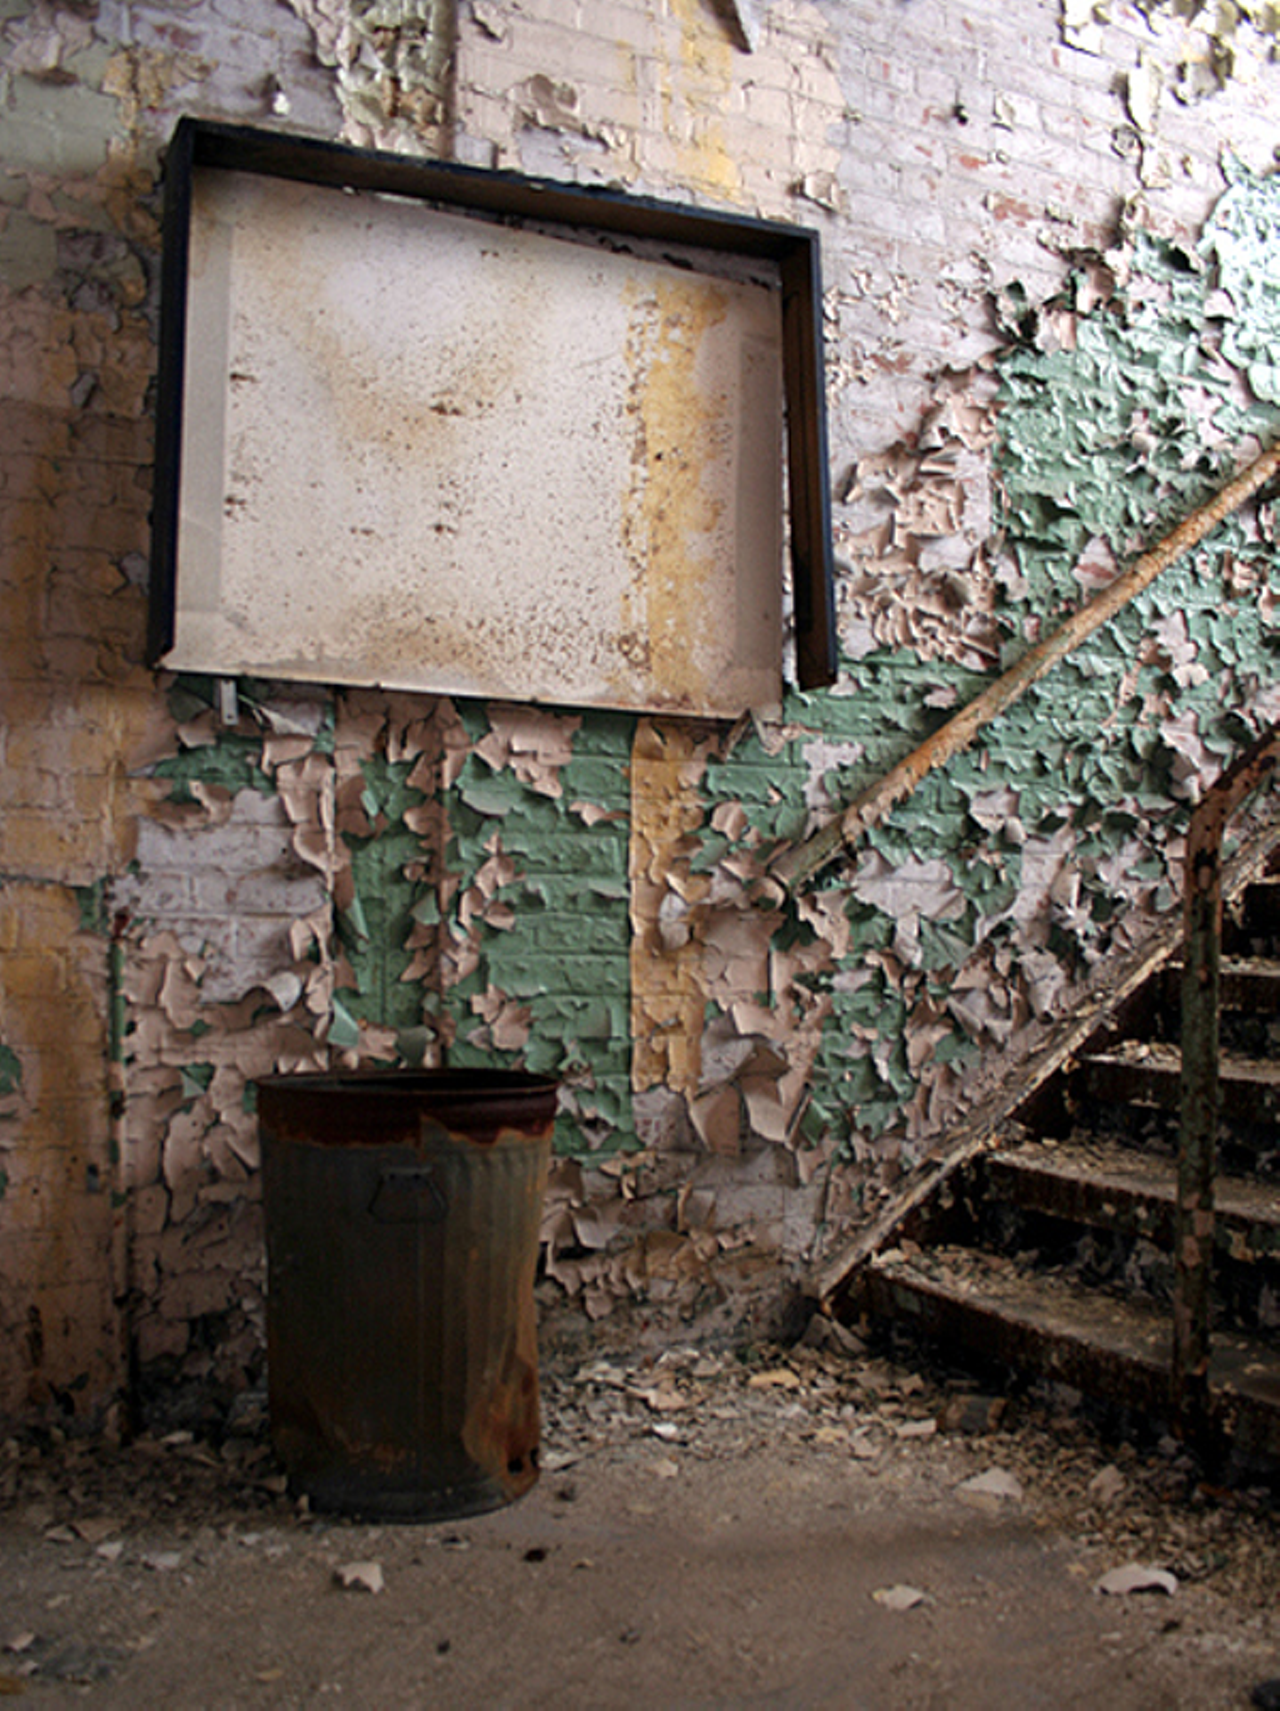 15 Photos of Cleveland's Abandoned Warner and Swasey Building